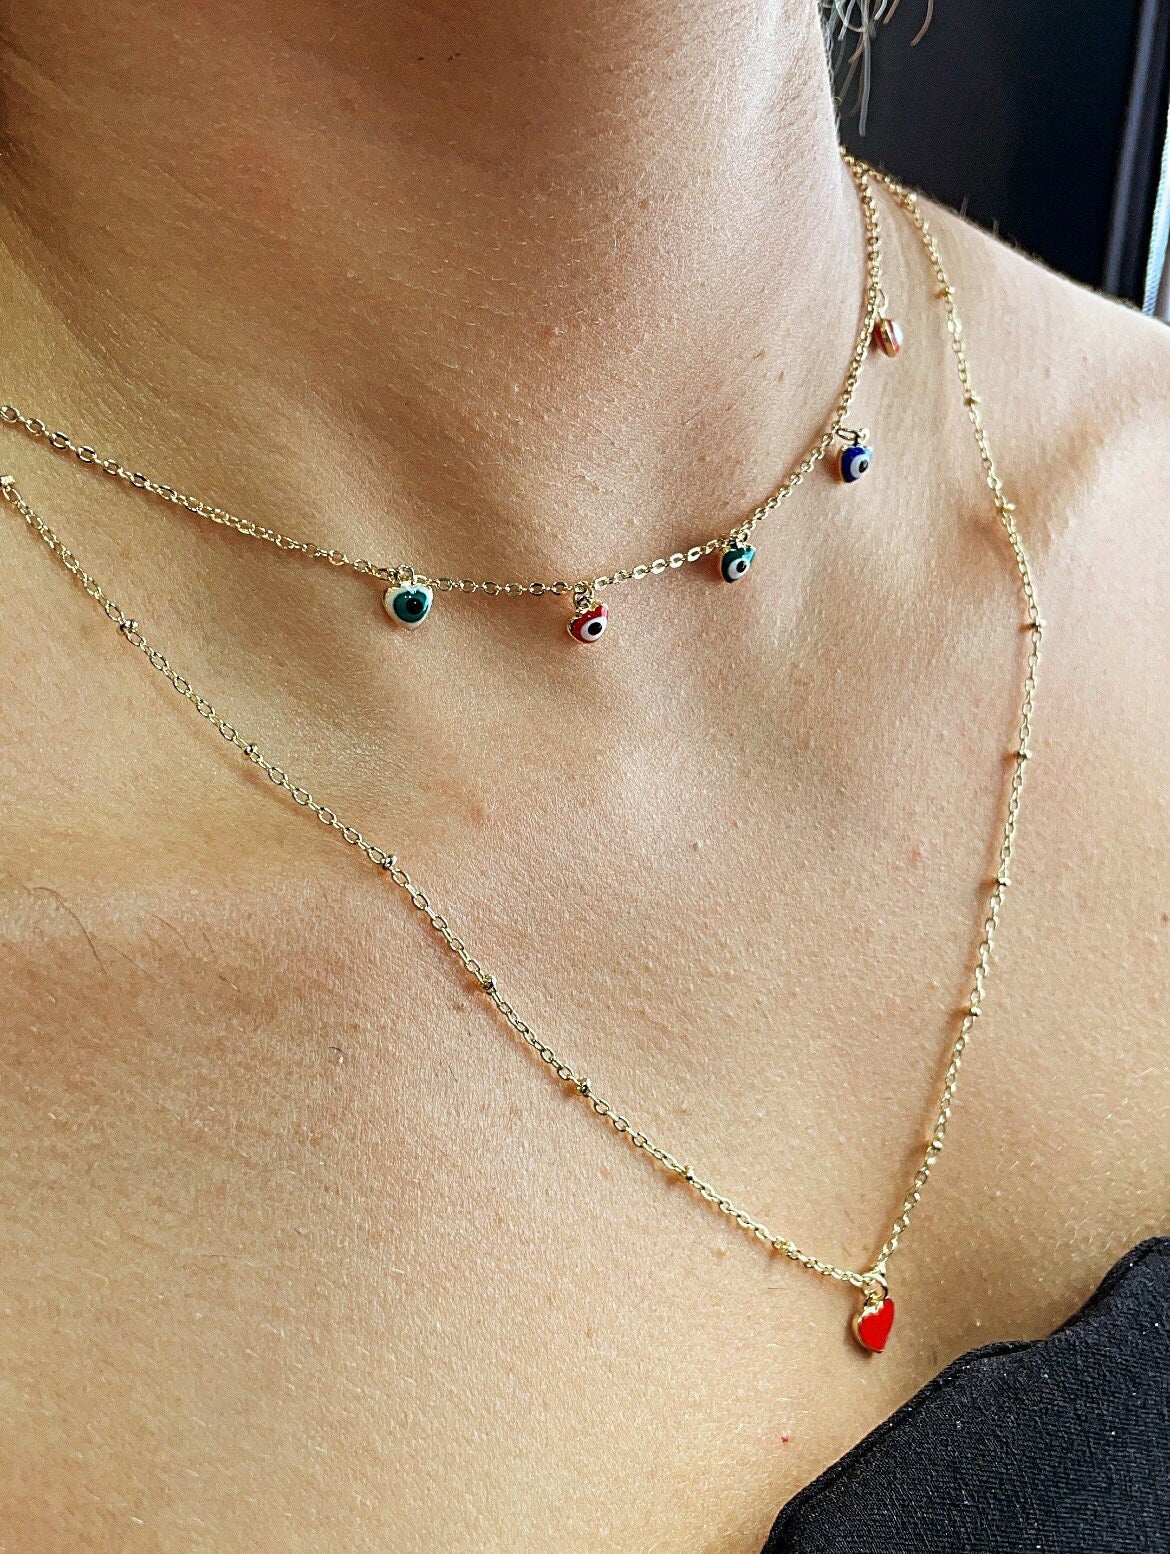 18k Gold Layered Layered Thin Satellite Chain Necklaces with 5 Colorful Evil Eyes